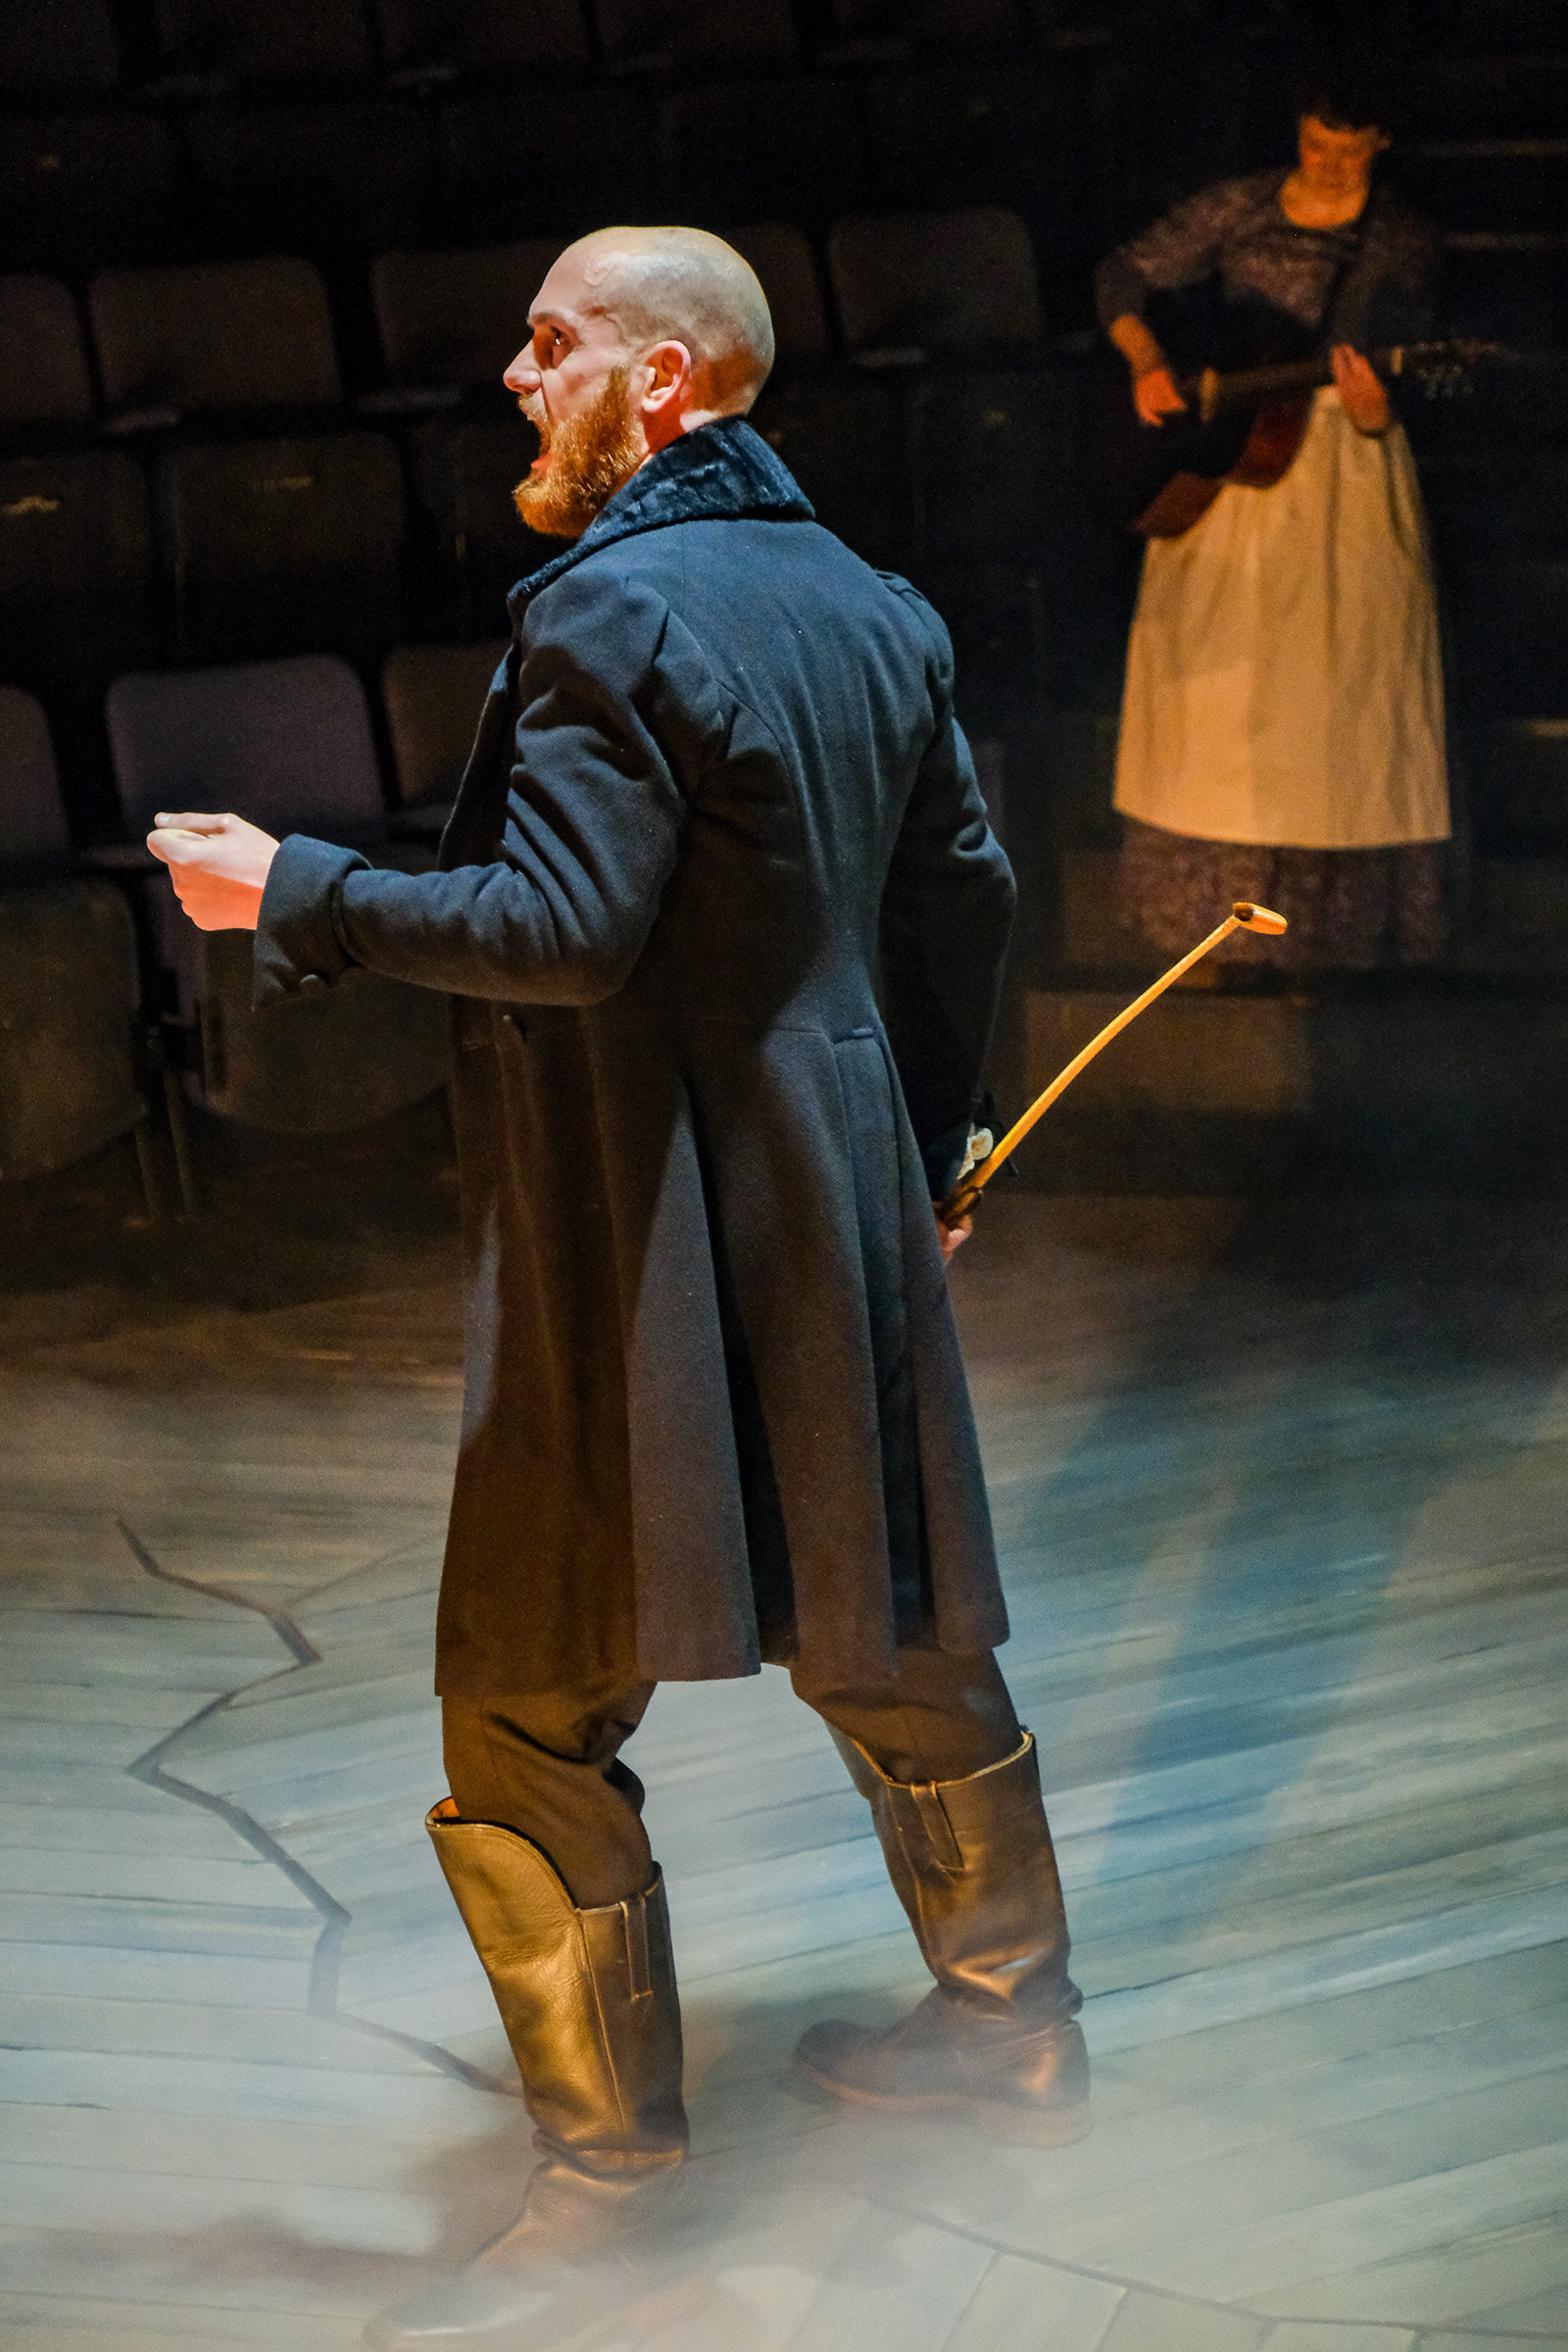 theatre performance image: Rochester stands centre stage dressed all in black. There is another performer playing guitar in the background.